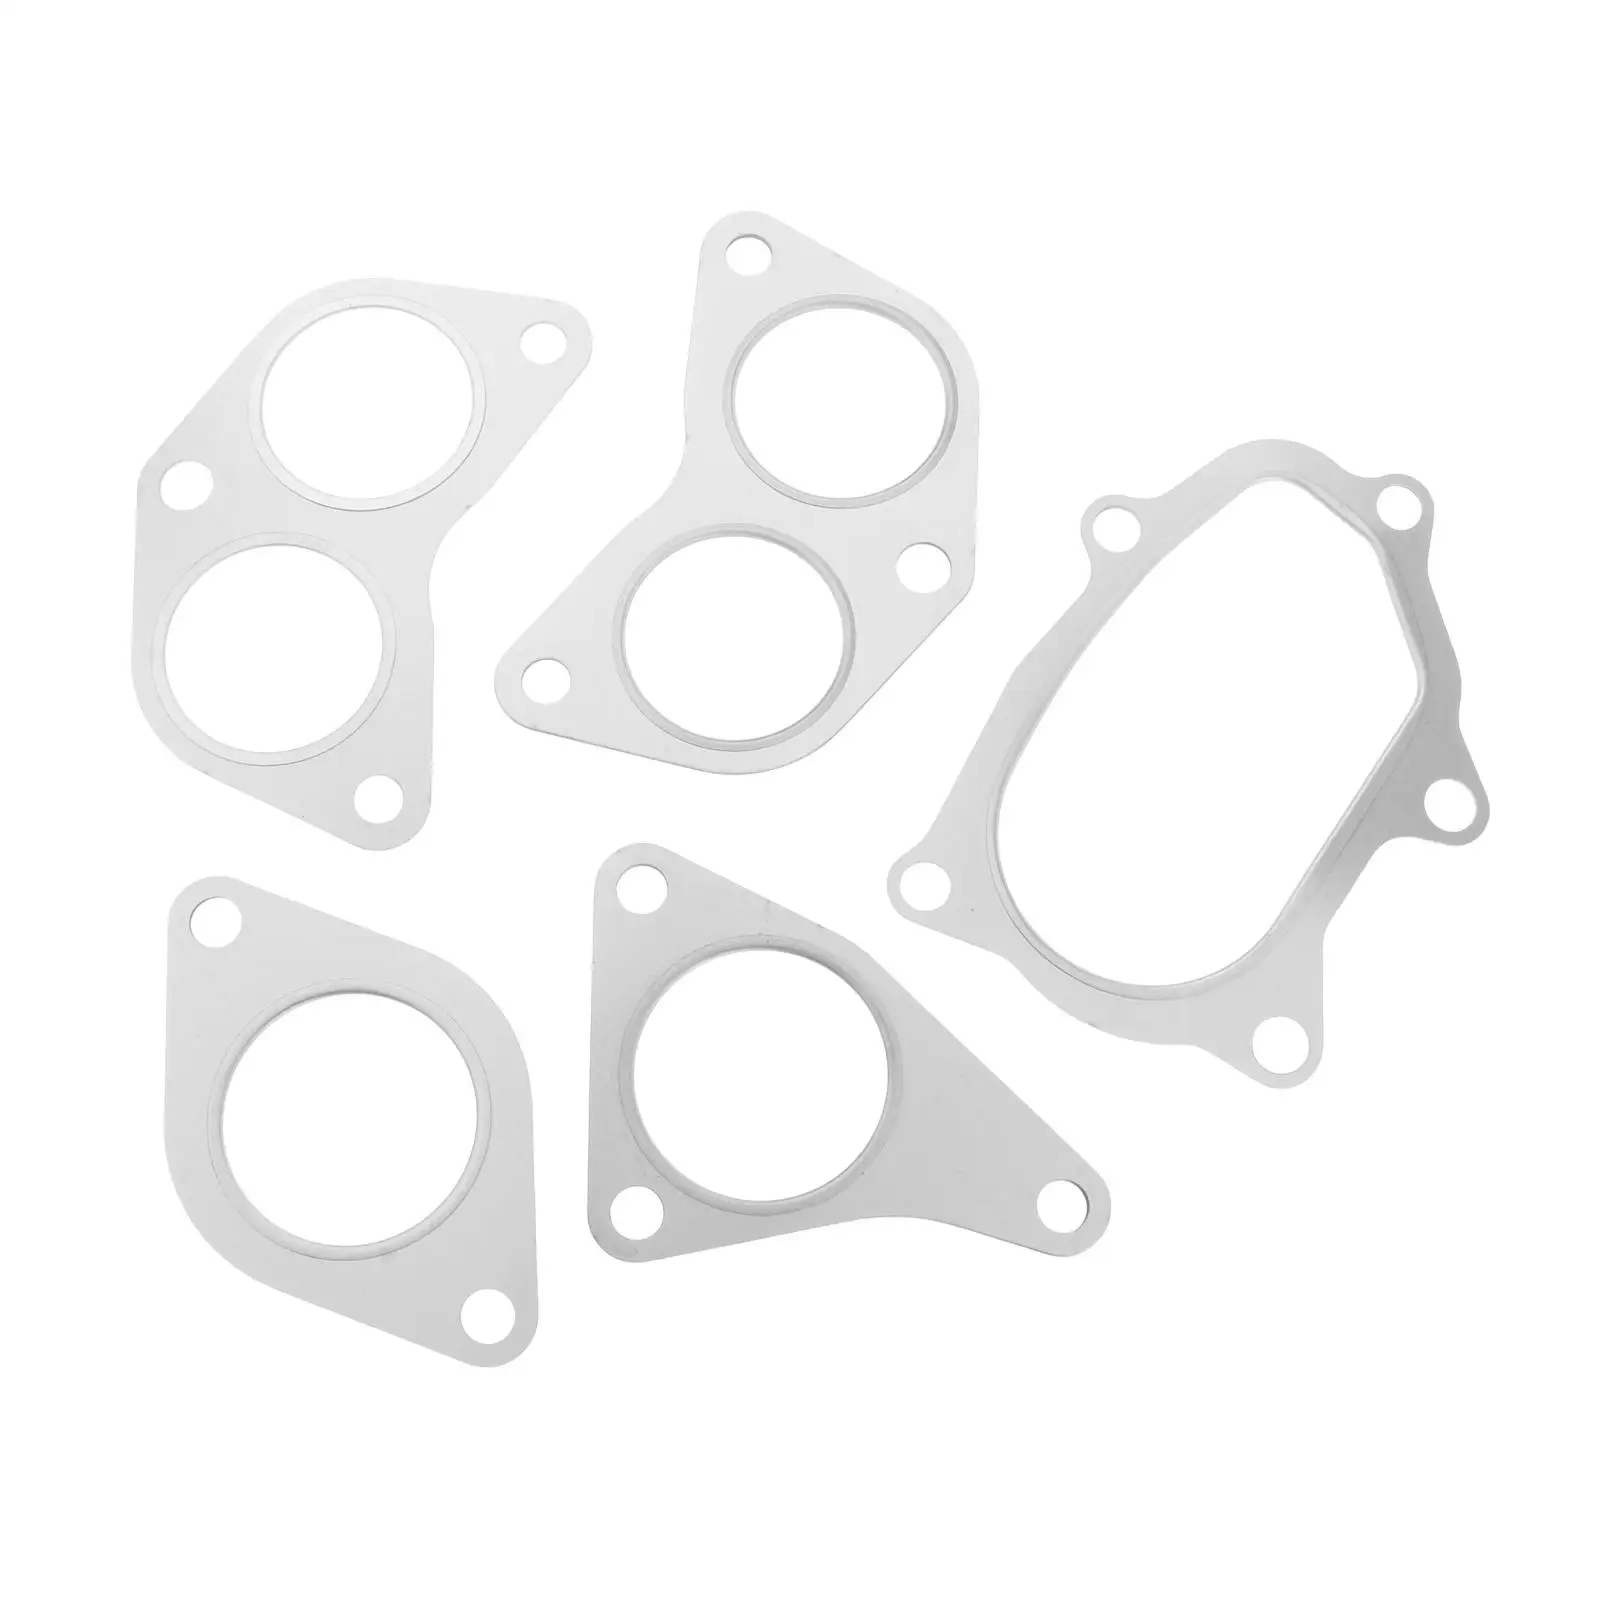 Exhaust Manifold Gasket Kit Up&down Pipe for Motors EJ20G EJ20K 14038AA000 Spare Parts 1 Set